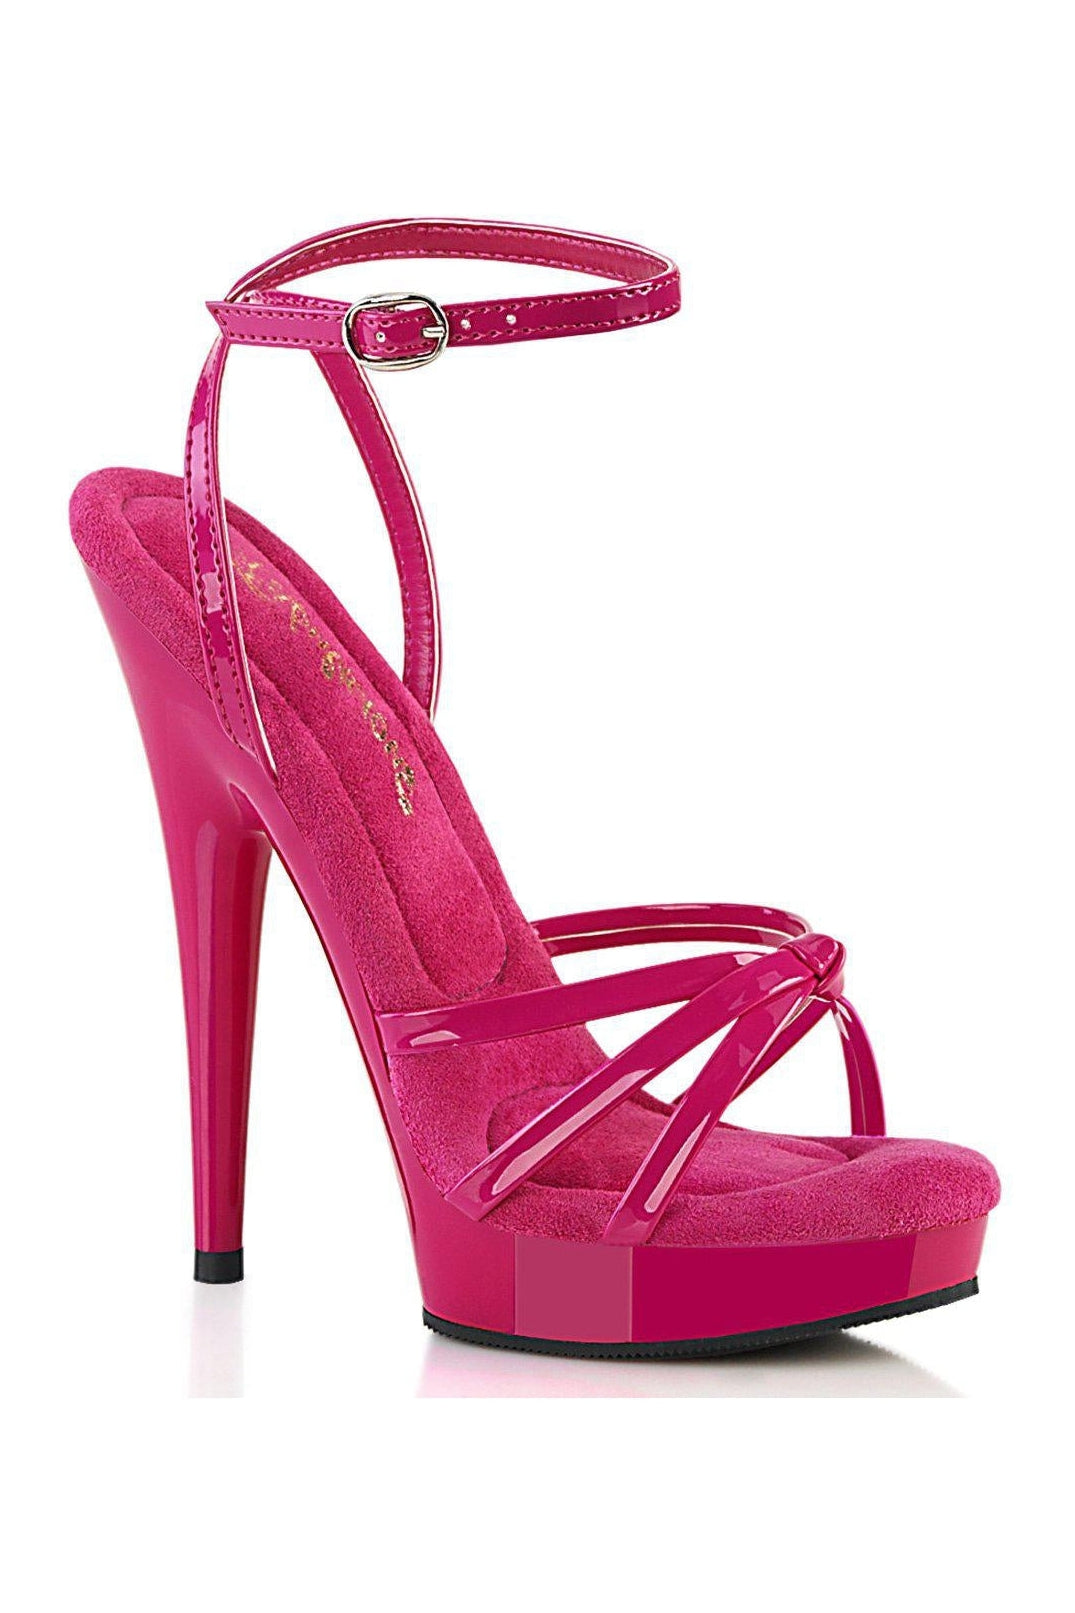 SULTRY-638 Sandal | Pink Patent-Sandals-Fabulicious-Pink-6-Patent-SEXYSHOES.COM